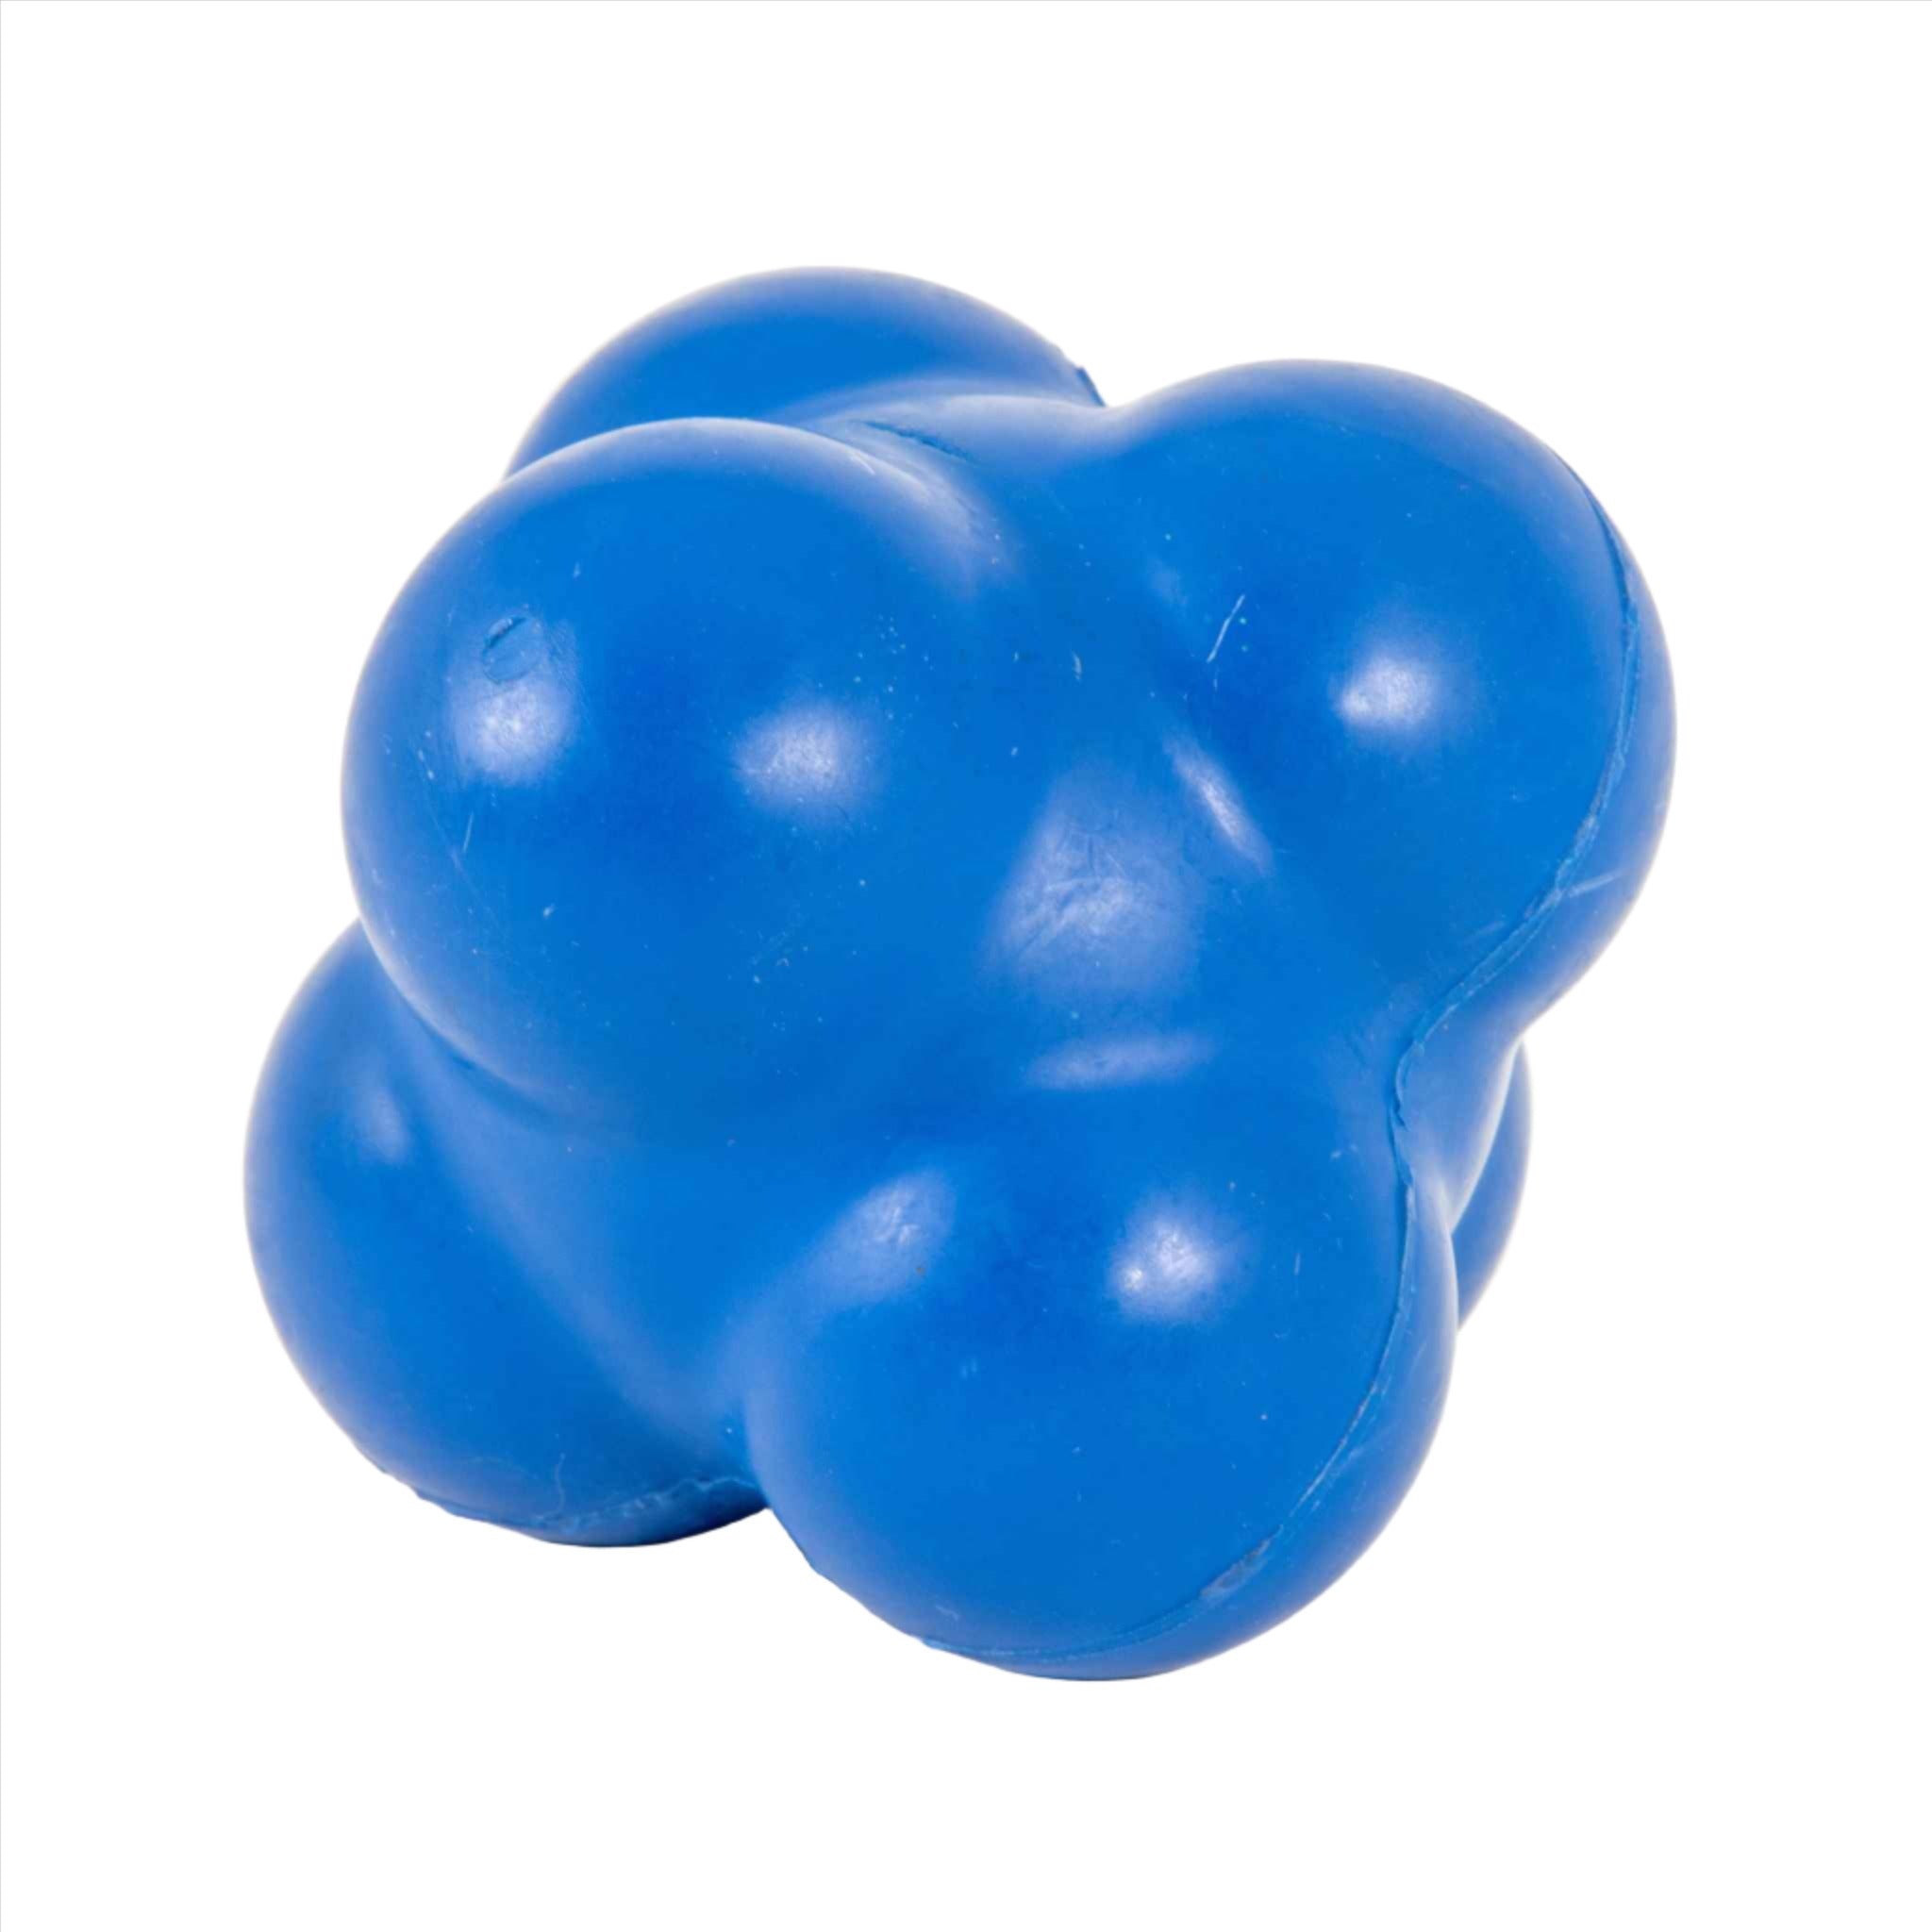 Reaction Ball | Blue plastic ball with lots of round lumps. To bounce in an erratic manner for training reflexes and reaction